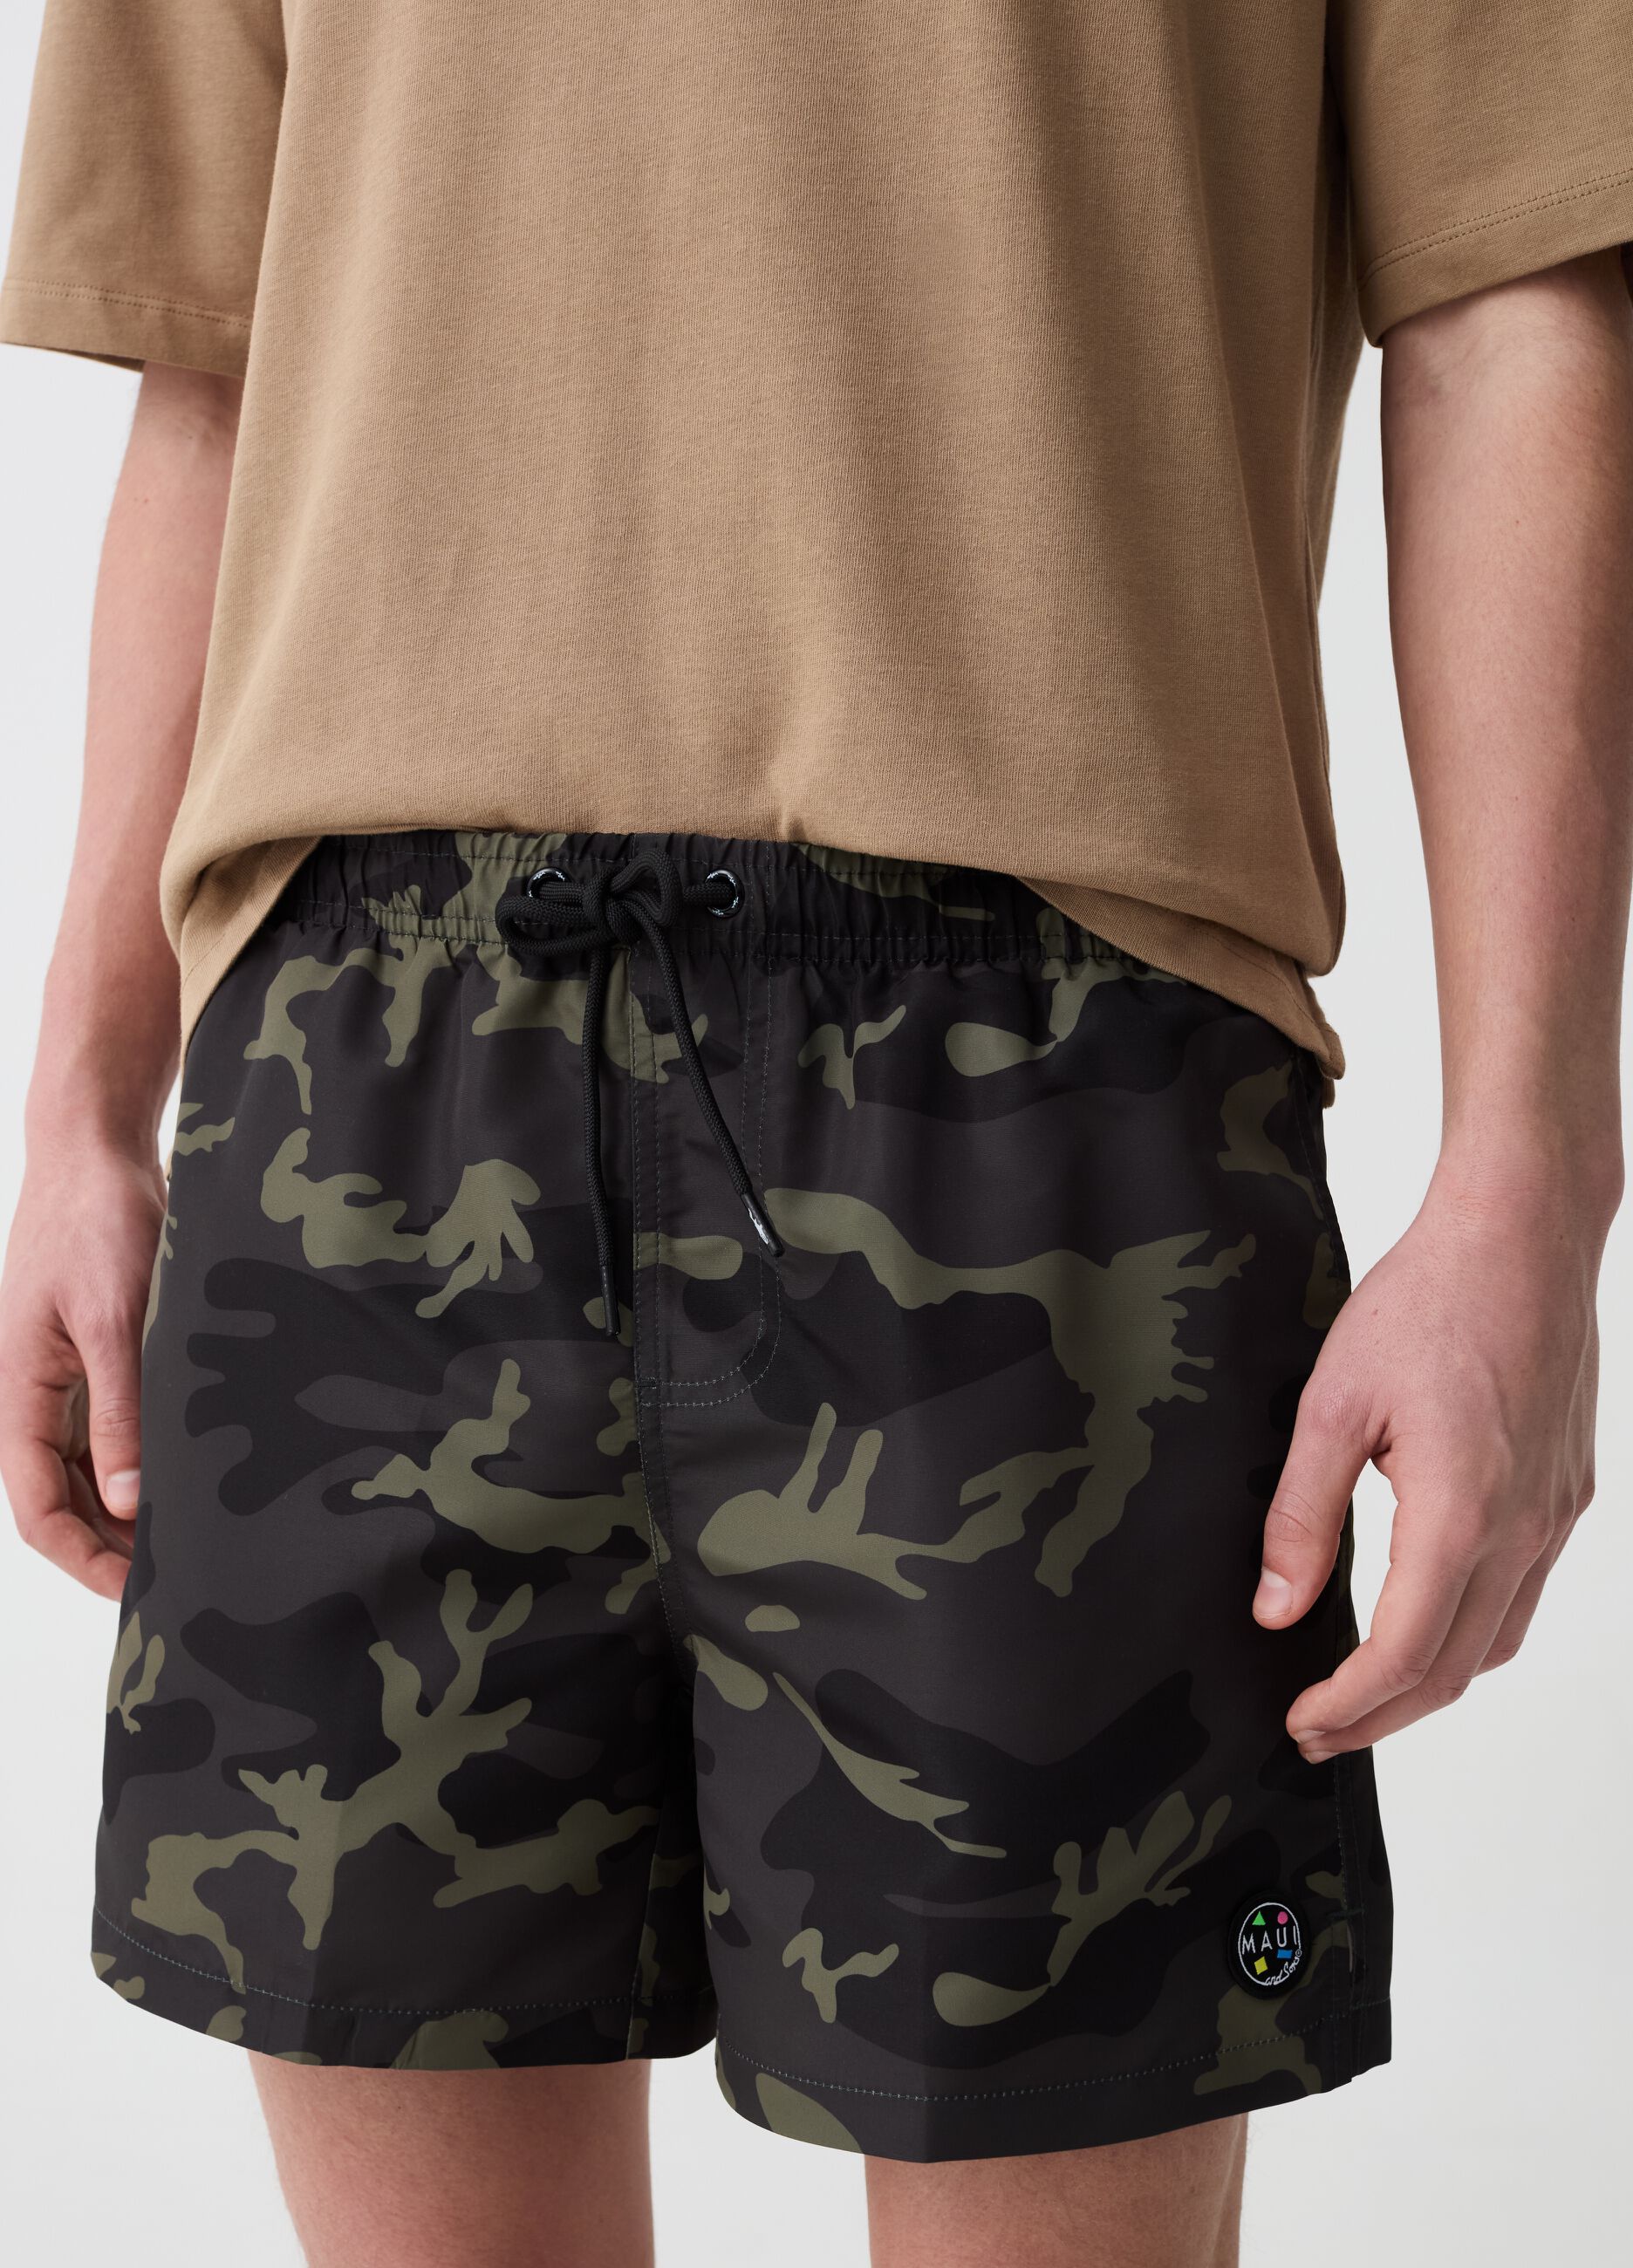 Camouflage swimming trunks